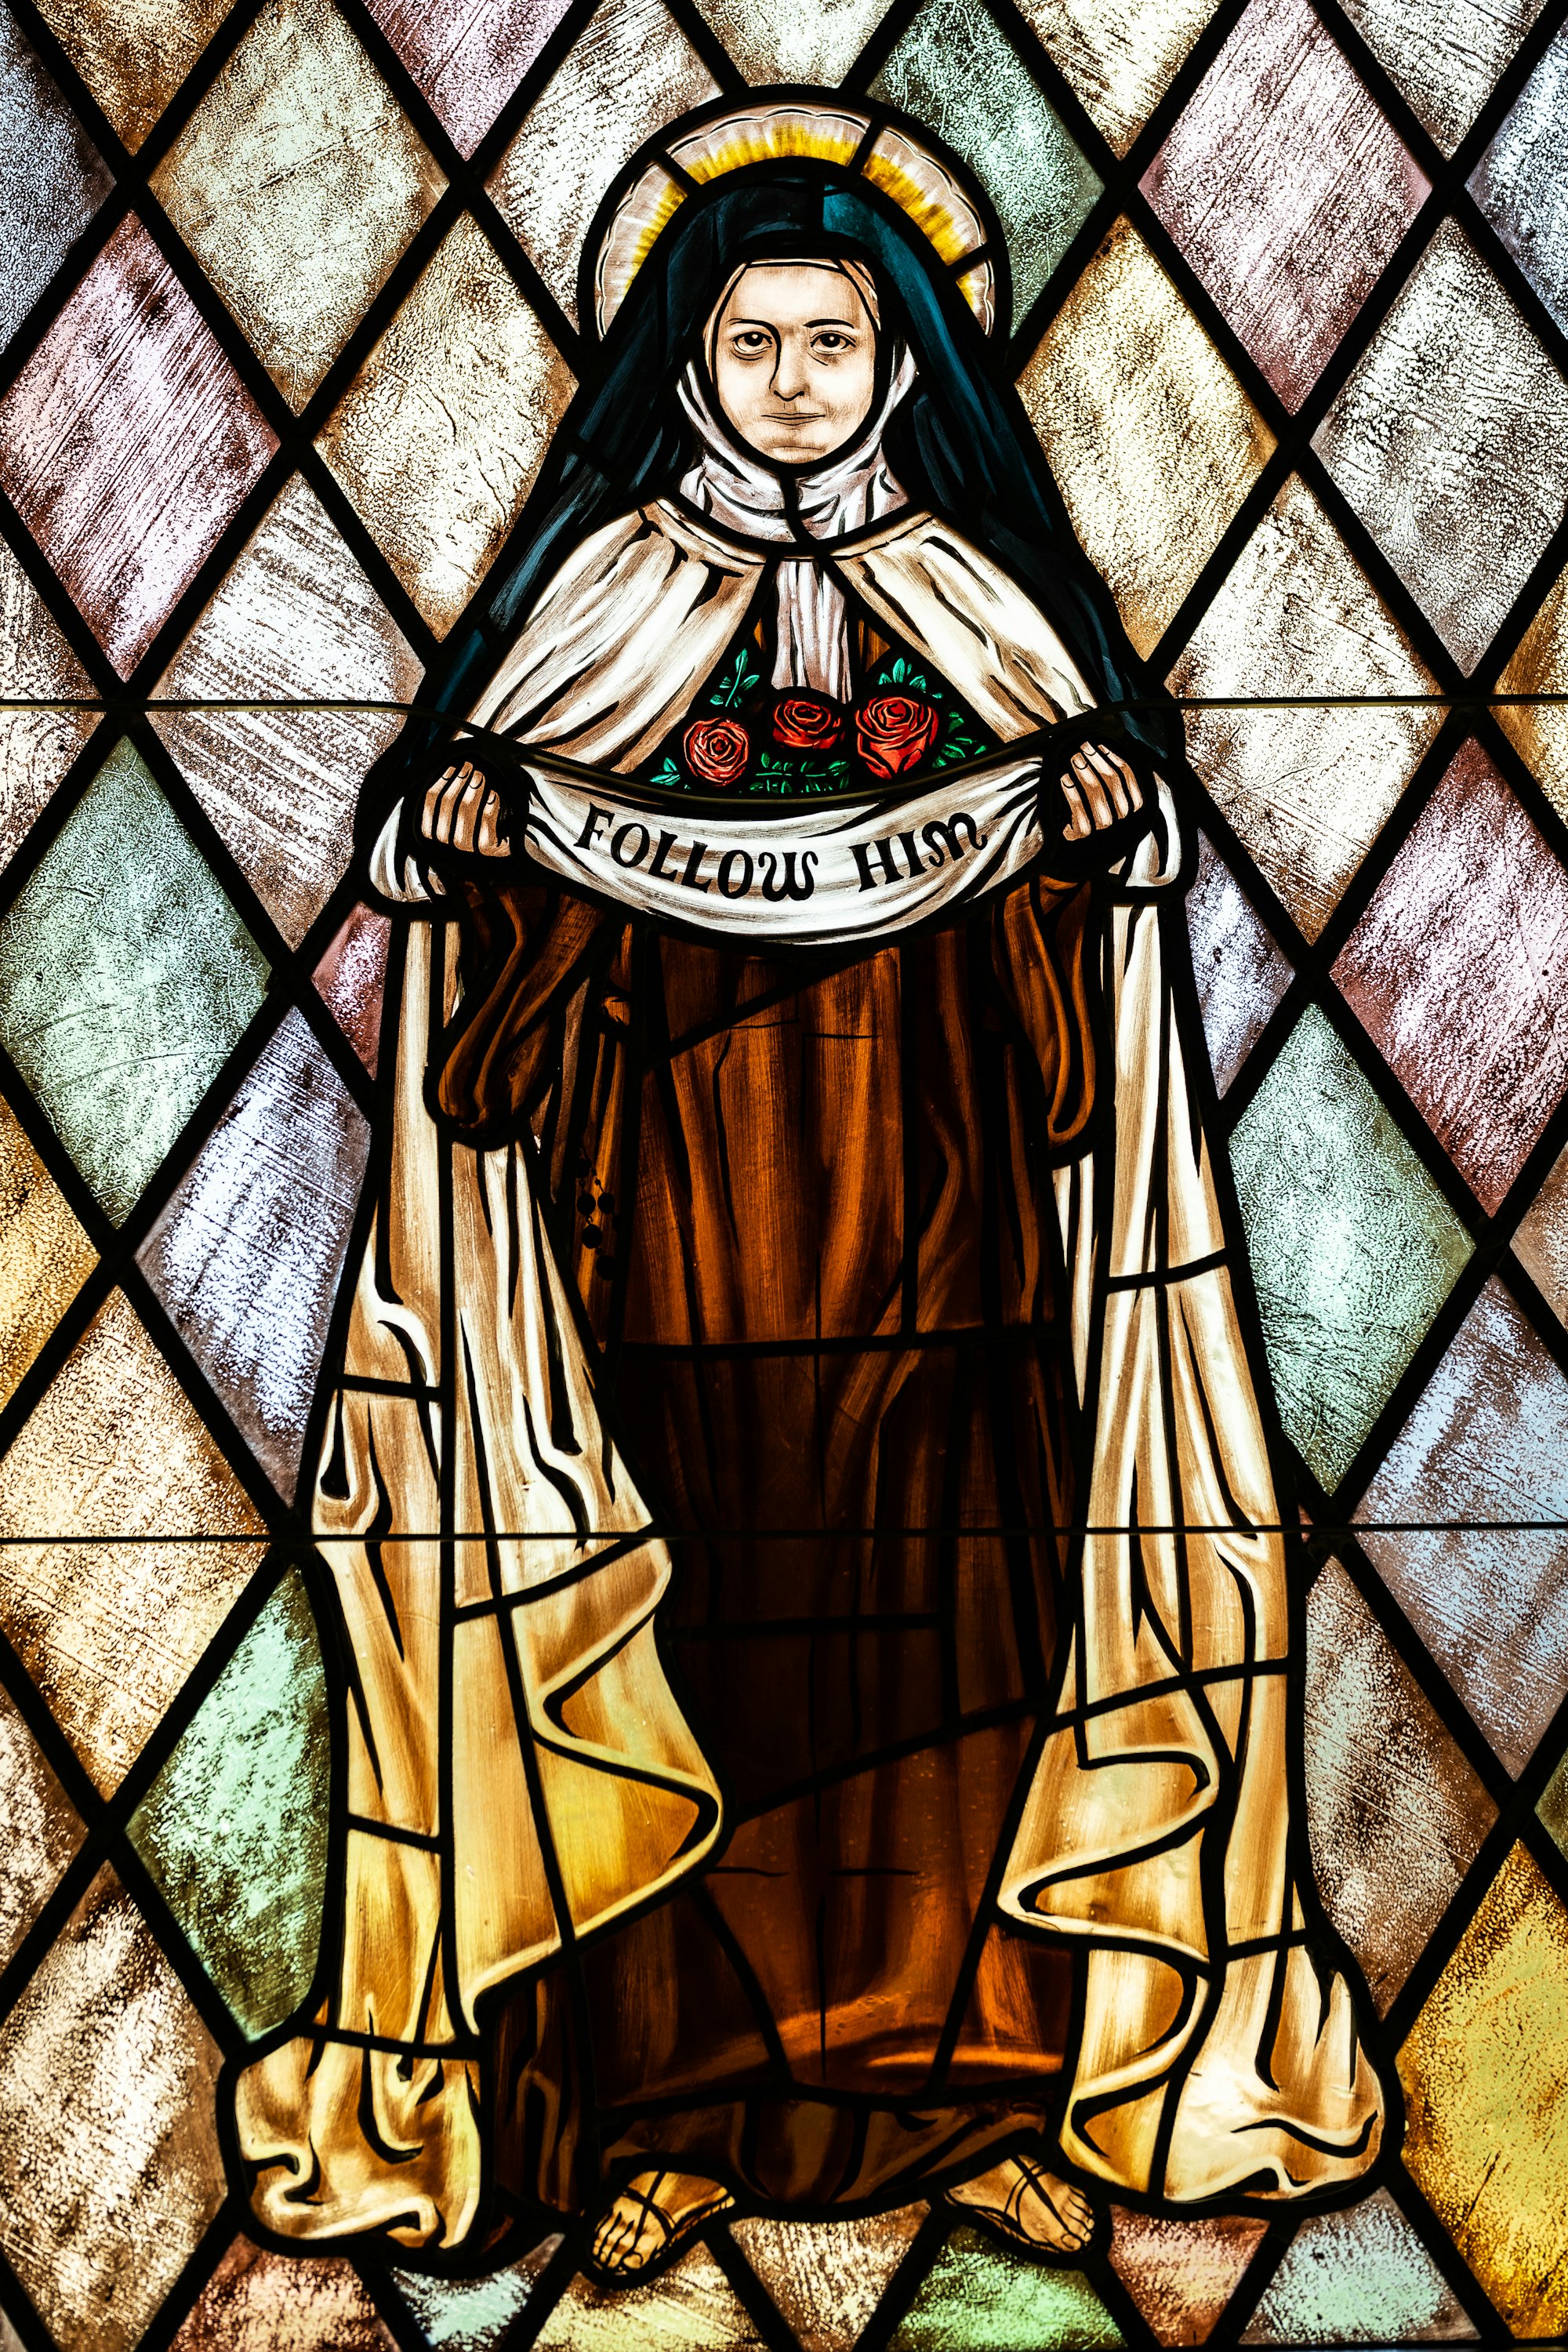 A stained glass window of St. Therese of Lisieux at St. Therese of Lisieux R.C. Church in Montauk, NY 